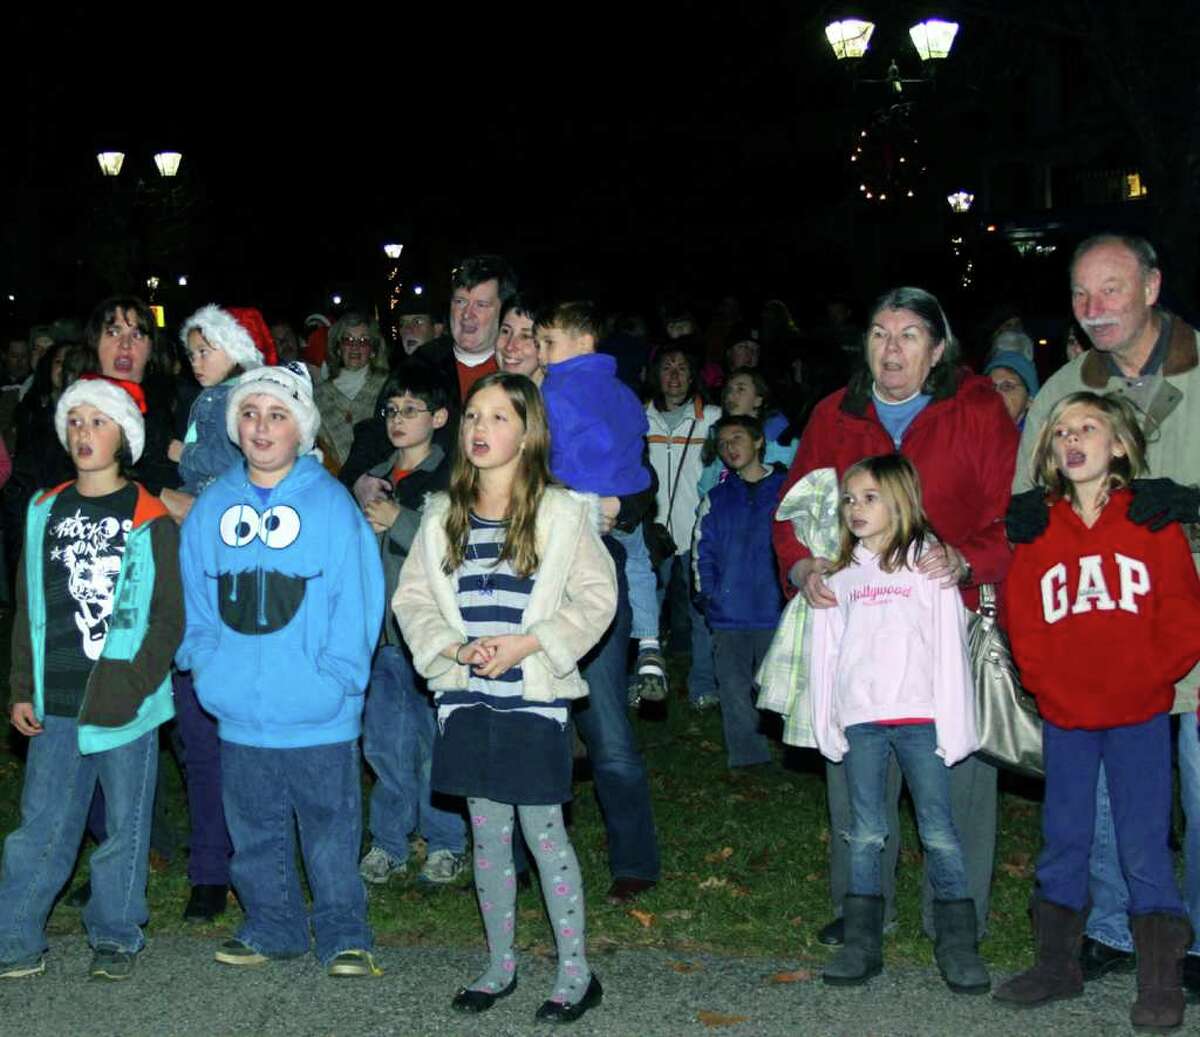 SPECTRUM/Voices of all ages chime in together to sing Christmas songs during the Village Center Organization's Festival of Lights celebration on the Village Green in New Milford. Nov. 26, 2011